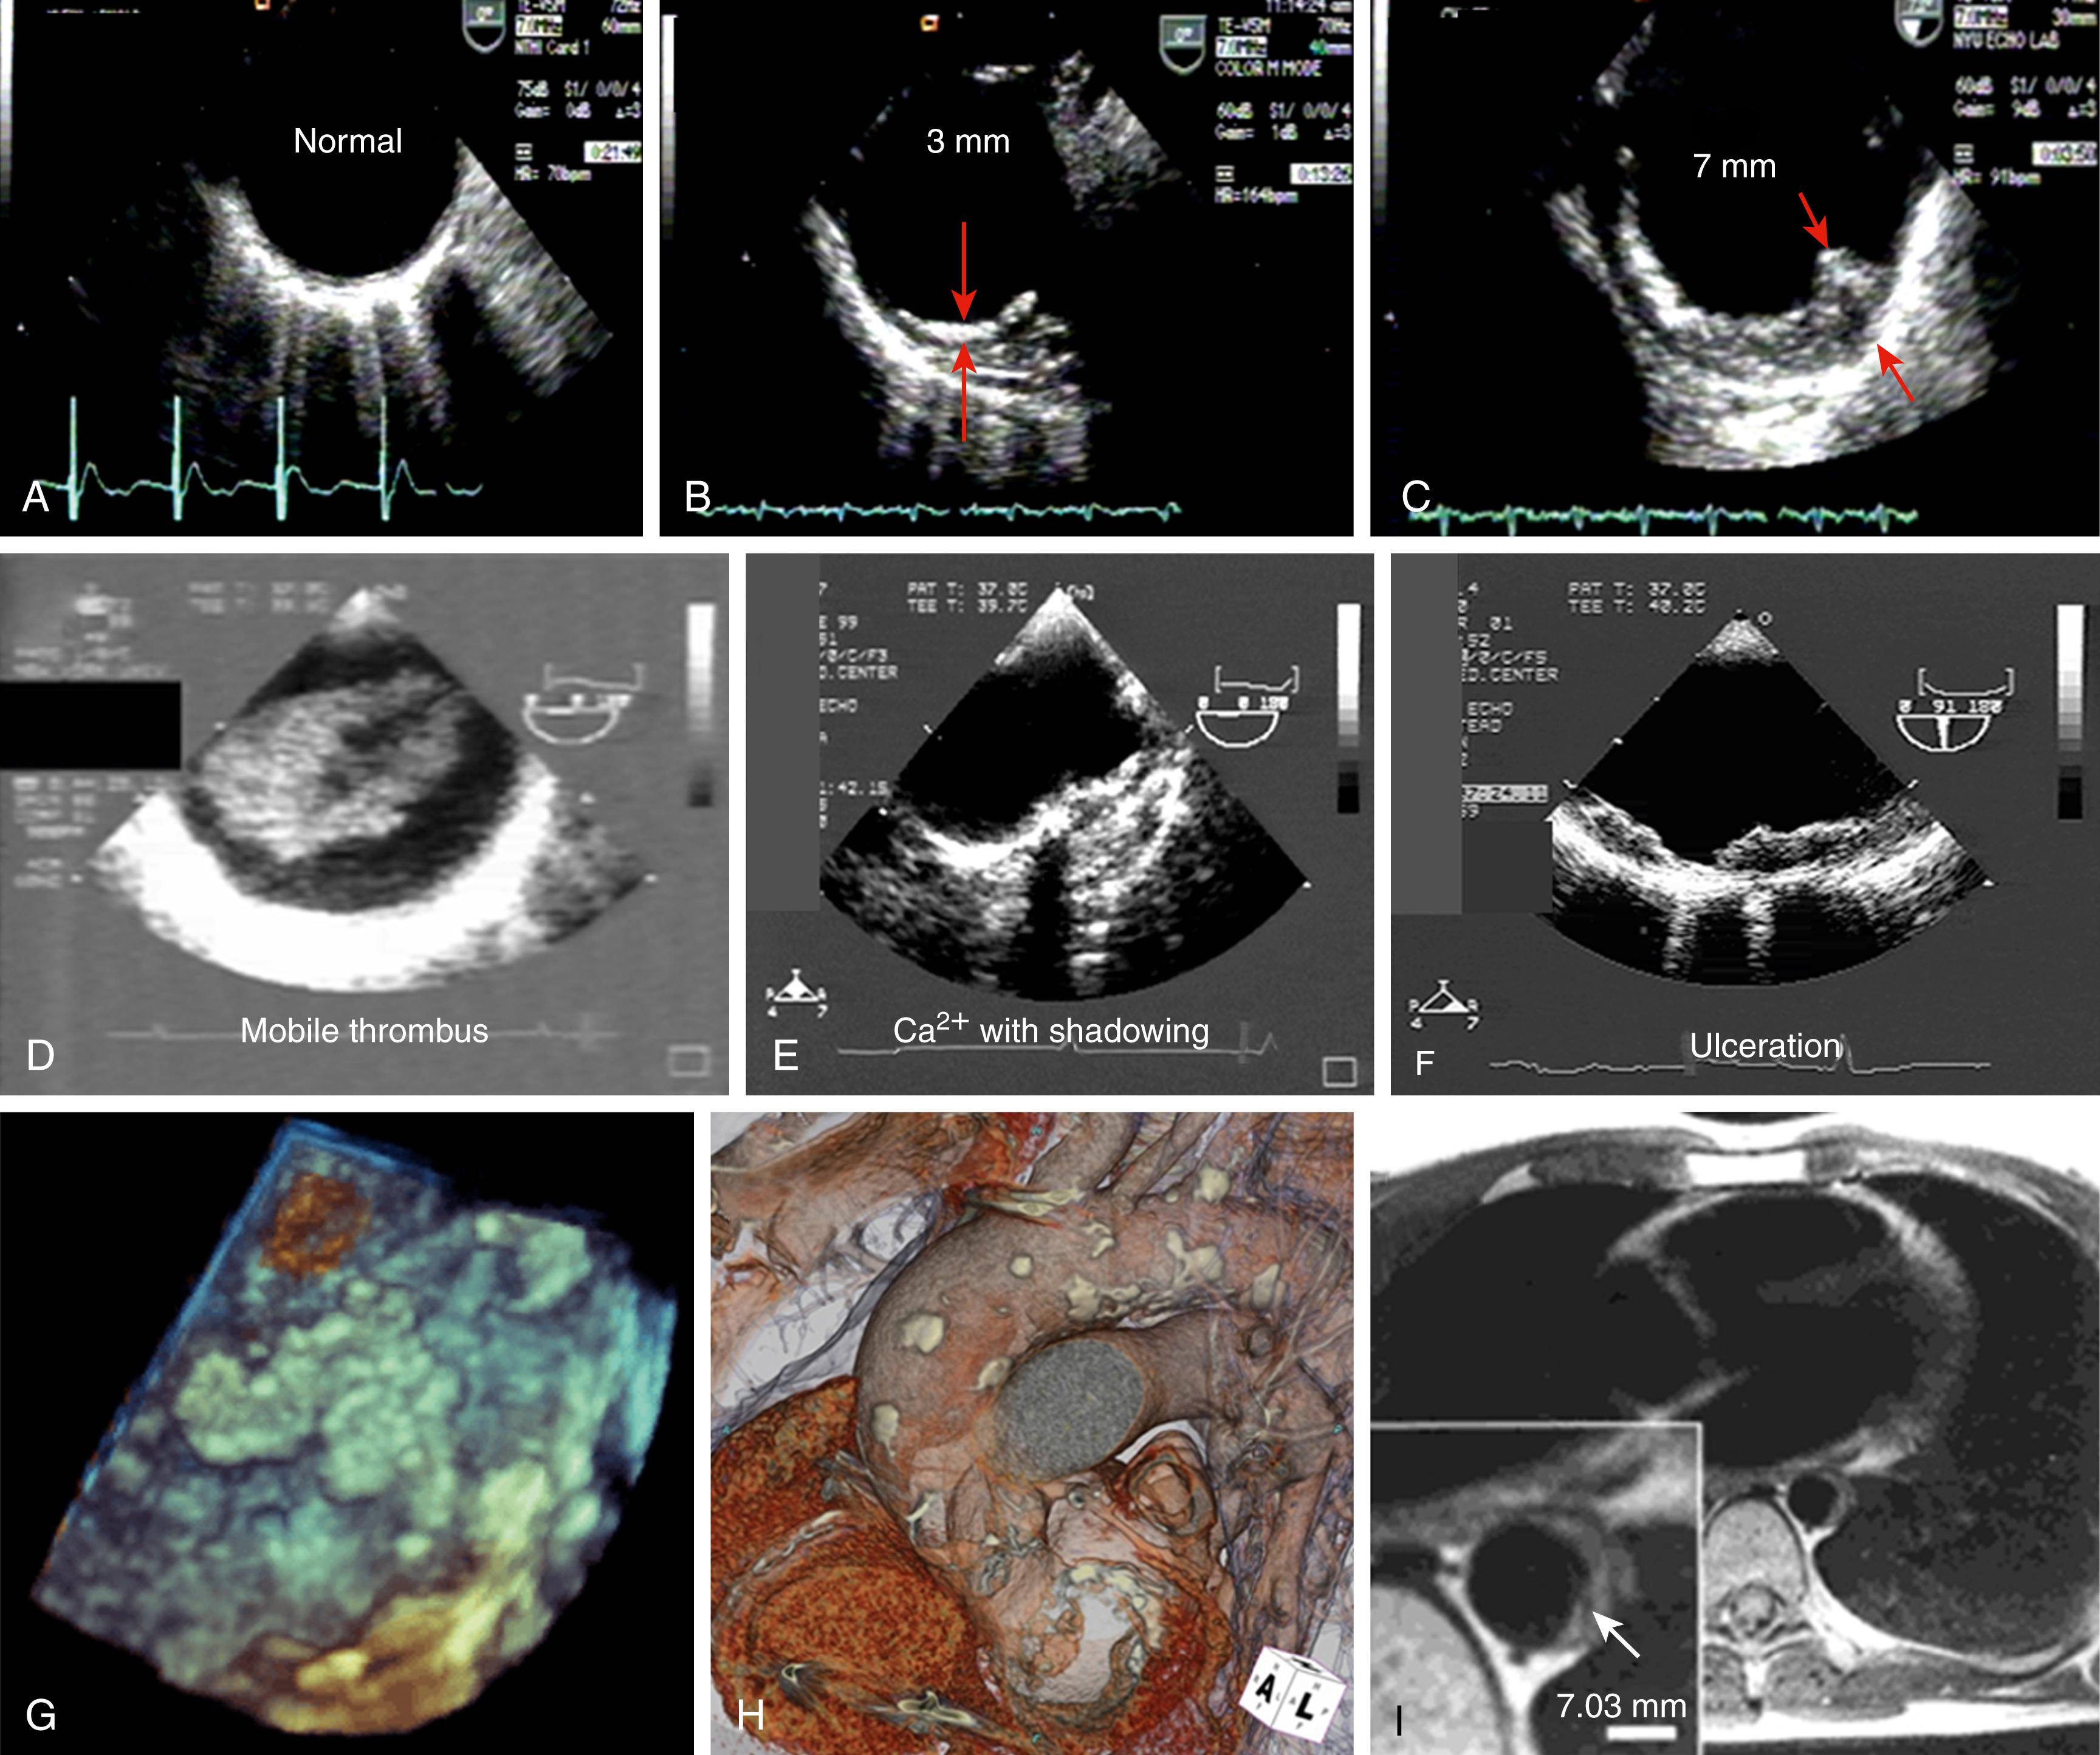 Figure 130.1, Transesophageal echocardiography shows a normal aortic intima ( A ), mild plaque ( B, red arrows ), severe plaque ( C, red arrows ), large superimposed thrombus ( D ), calcification ( E ), and ulceration ( F ). G , Three-dimensional transesophageal echocardiographic image shows the distribution, shape, and size of aortic arch plaques. H , Cardiac computed tomography demonstrates the distribution of aortic calcified plaques. I , Magnetic resonance imaging shows severe descending aortic plaque. Note the relatively lucent lipid core (arrow) .